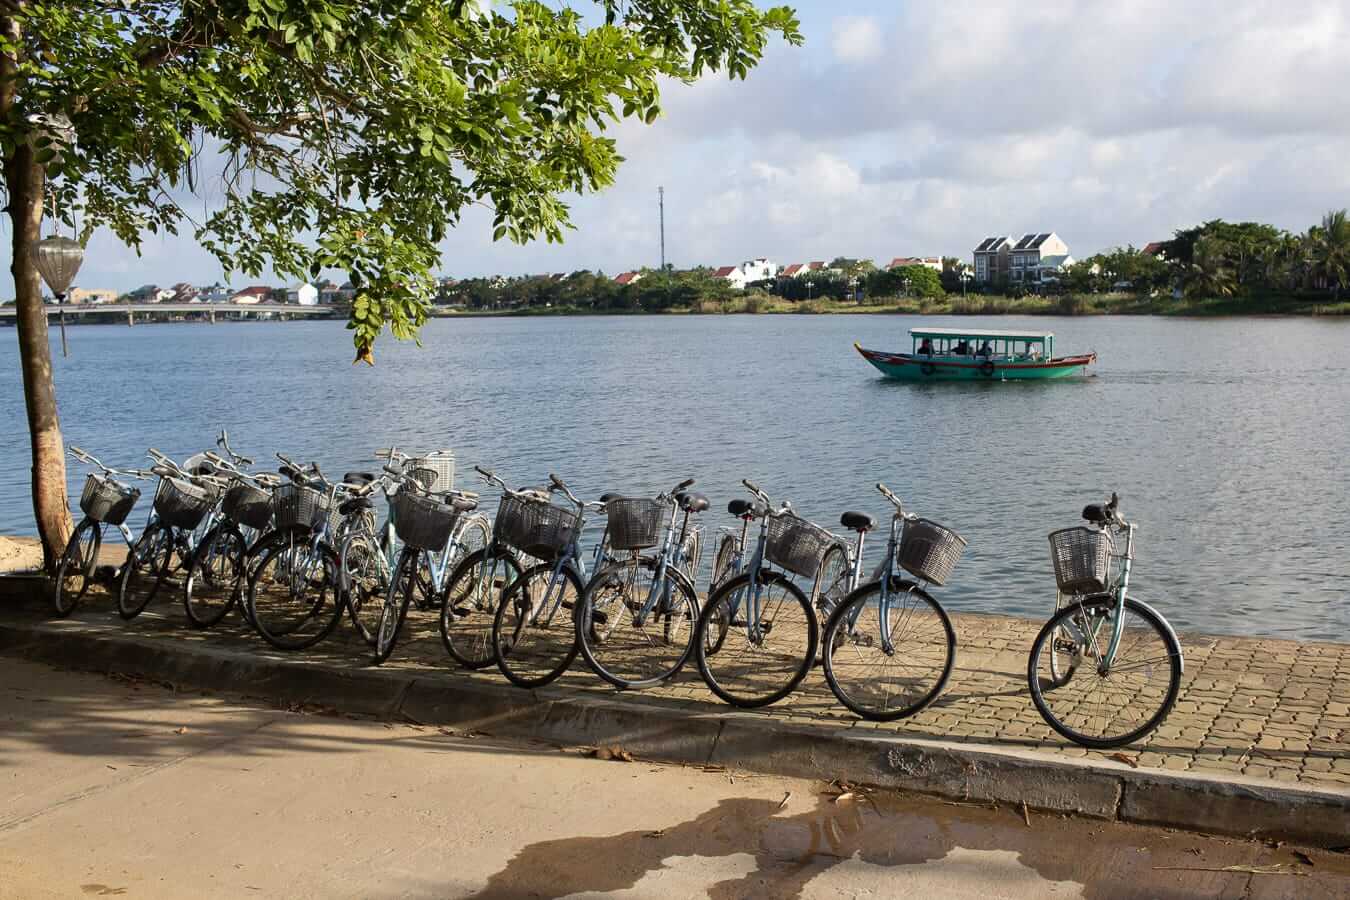 Parked bikes: Hoi An cycling